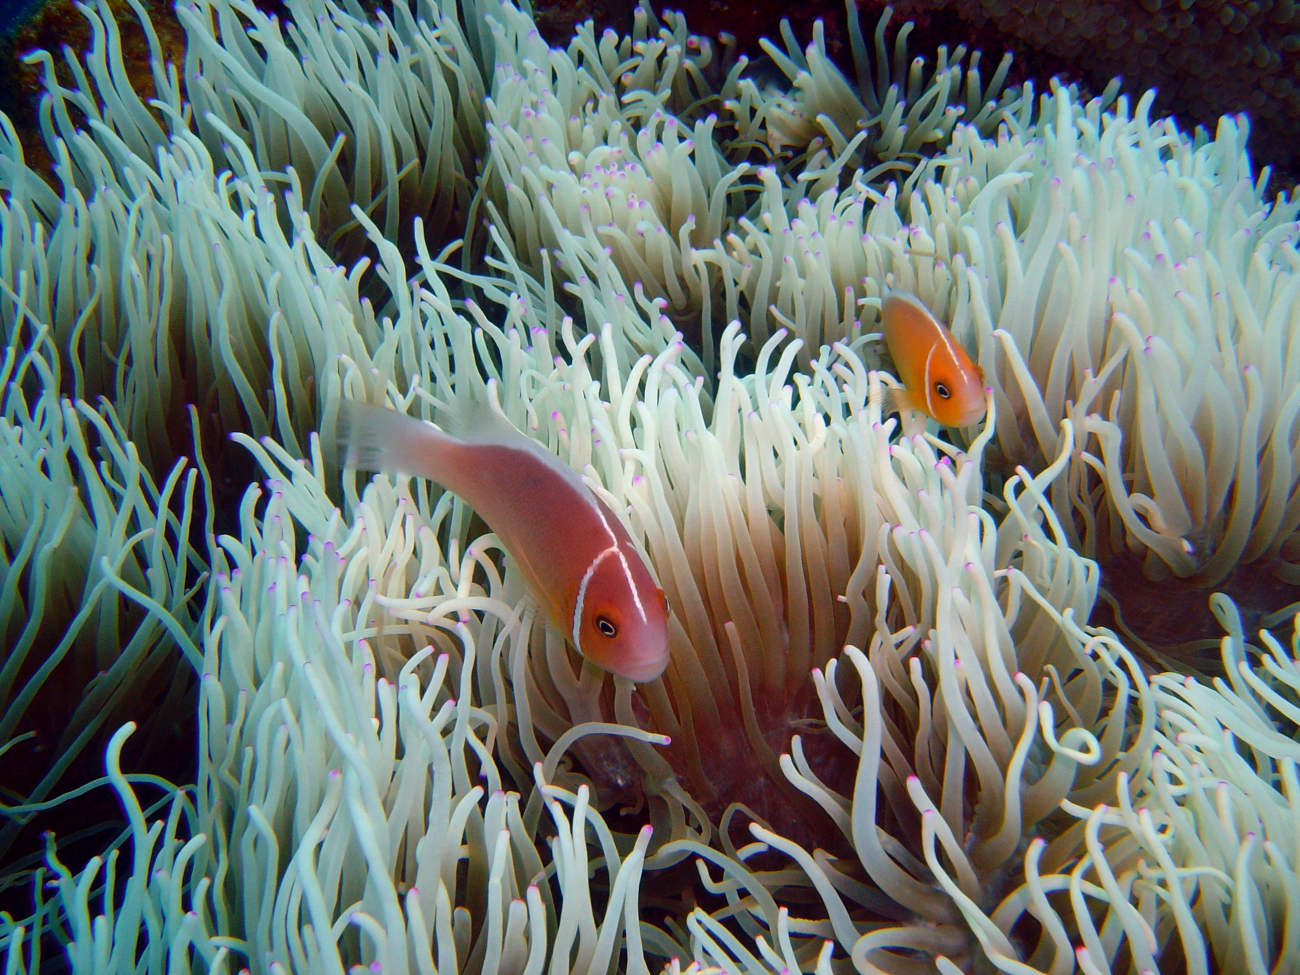 Sea anemone with pink anemonefishes (Amphiprion perideraion